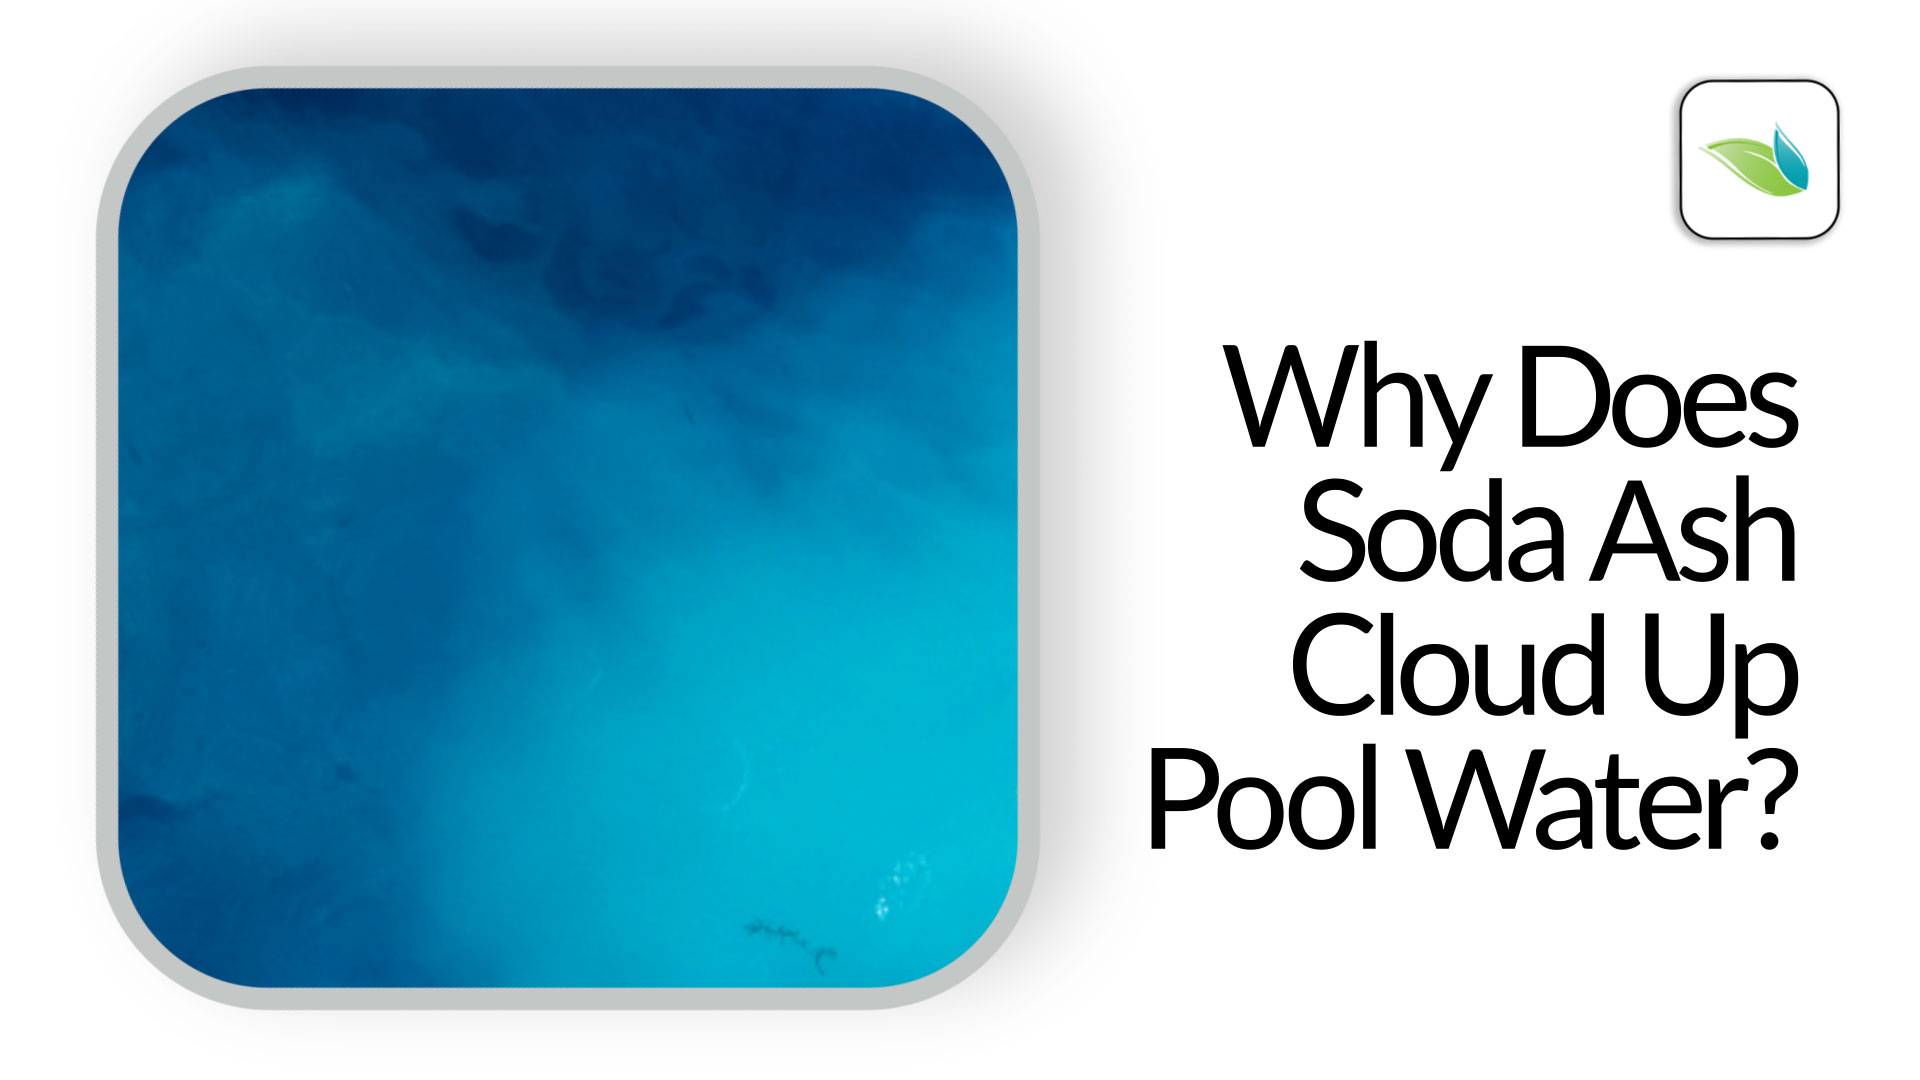 Why does Soda Ash cloud up pool water?